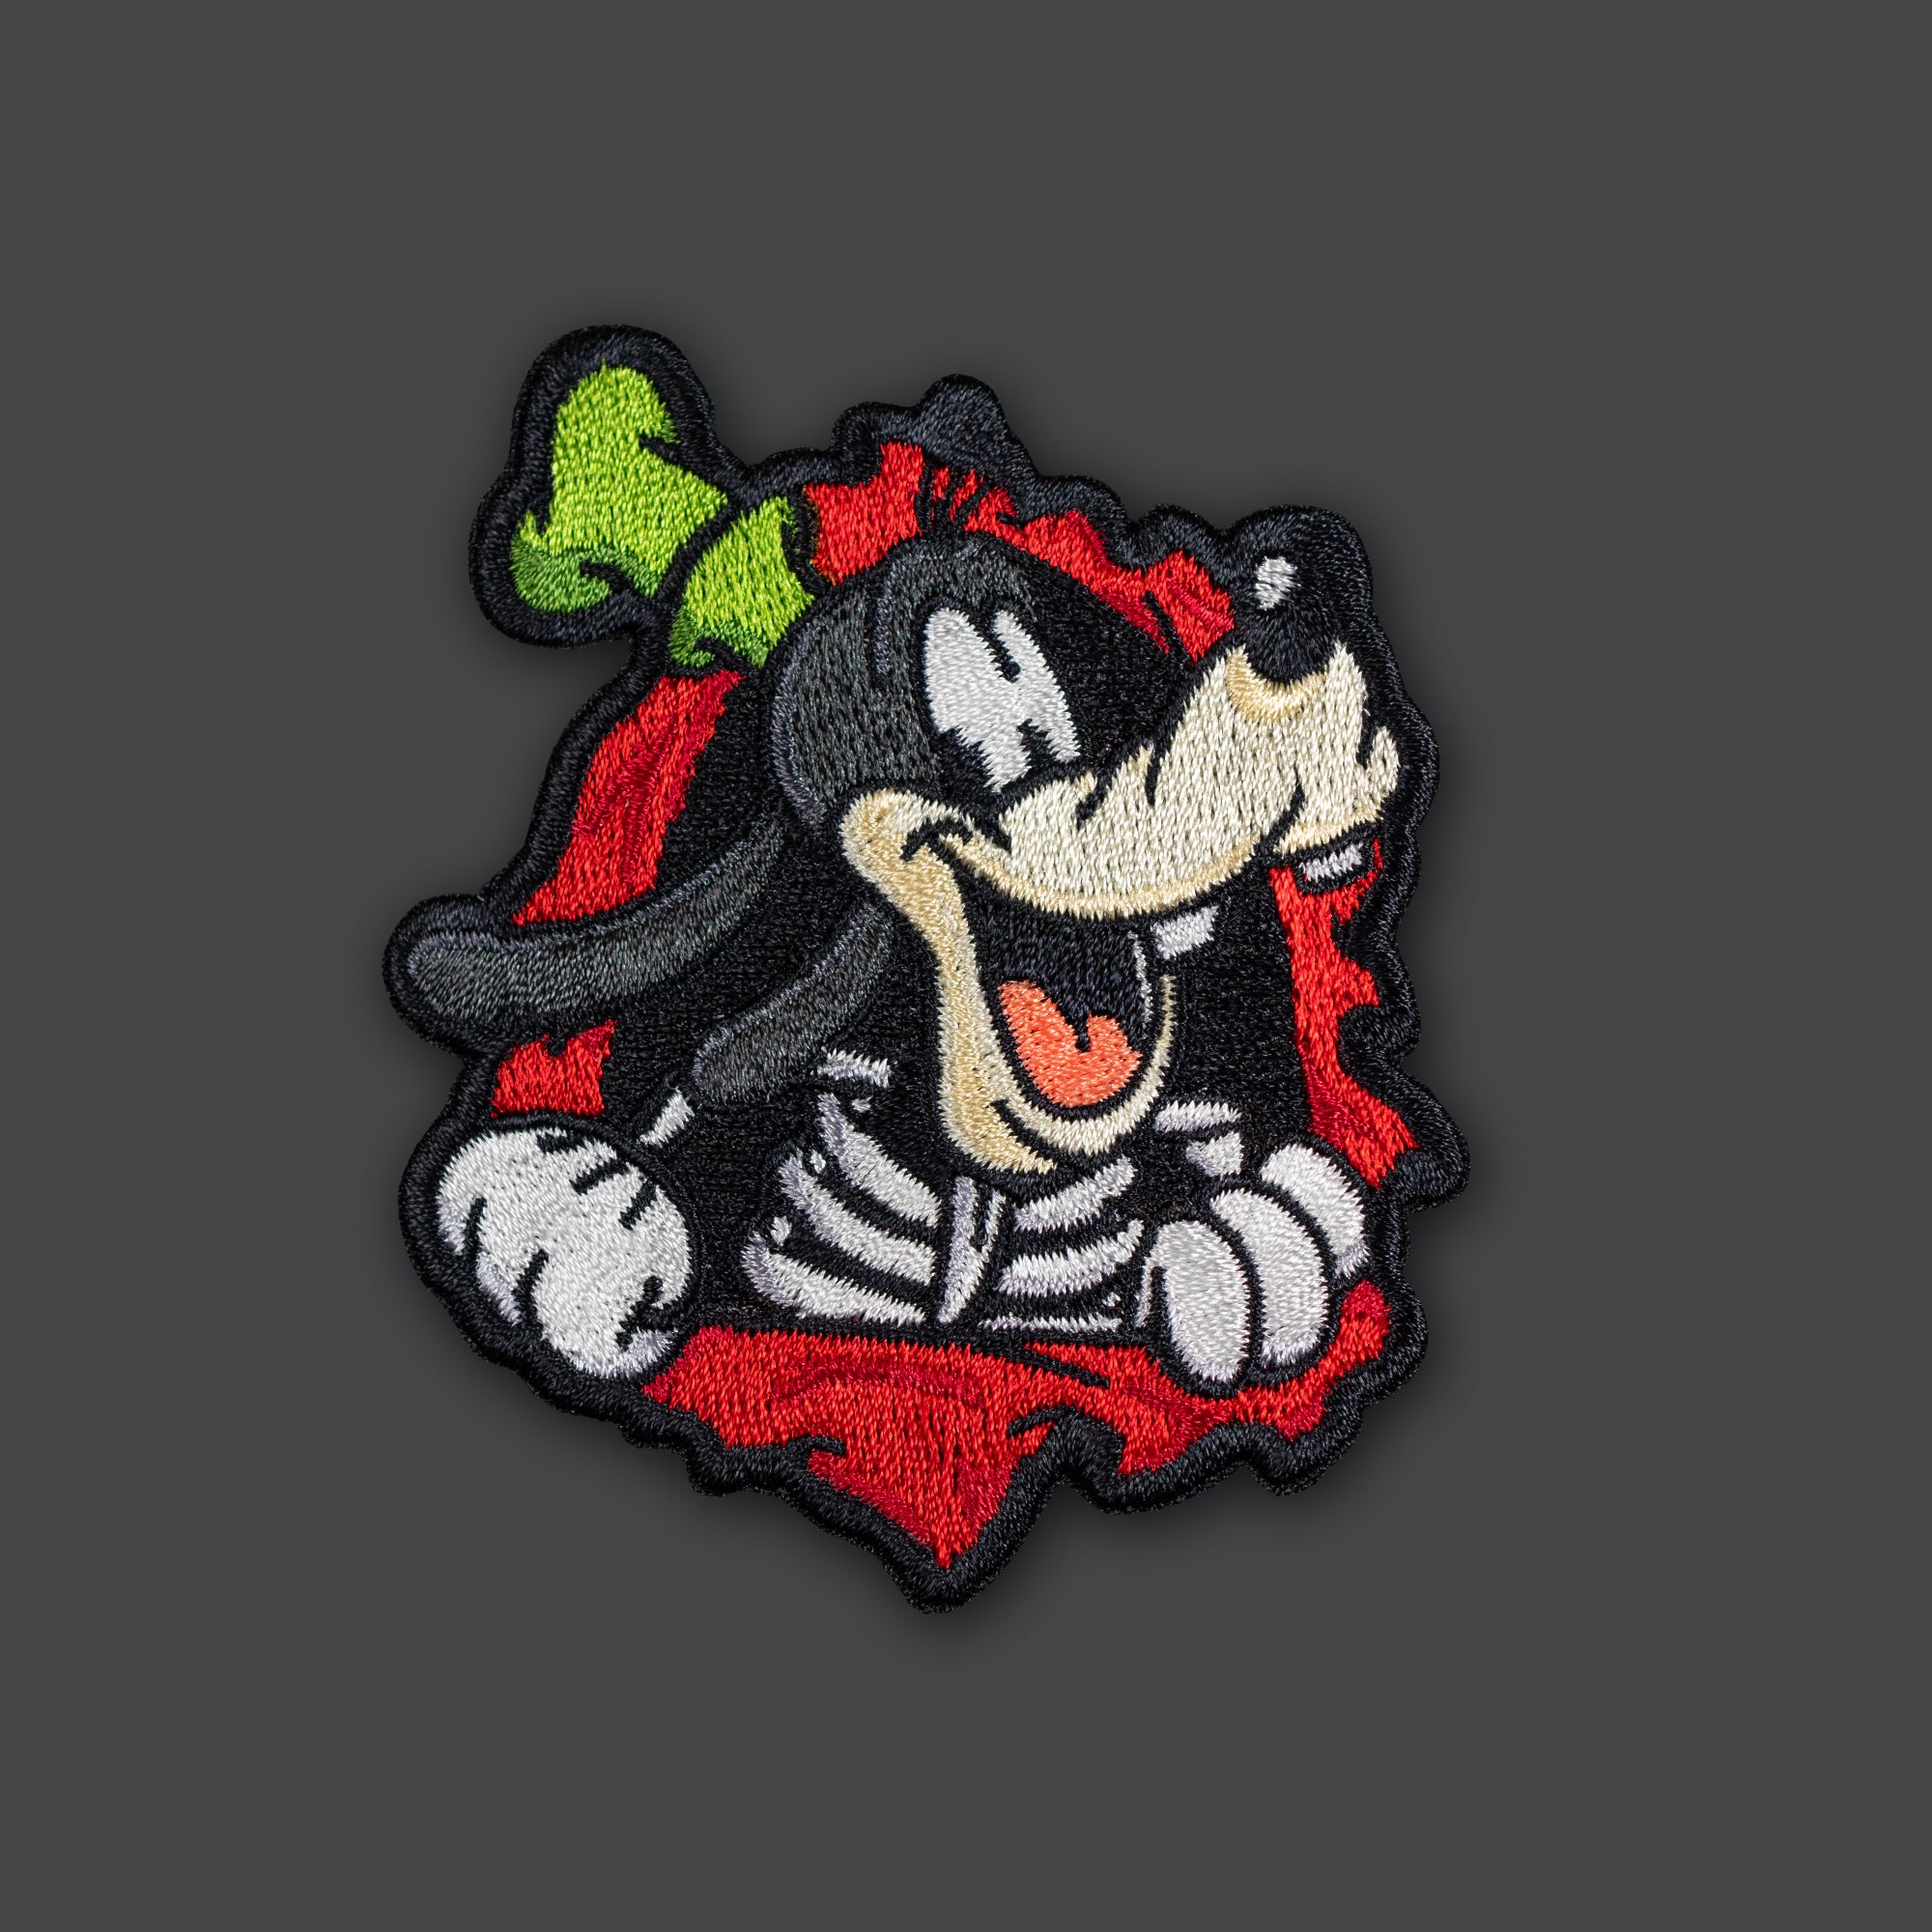 Old School Sk8 Ripper Goof Cow Morale Patch